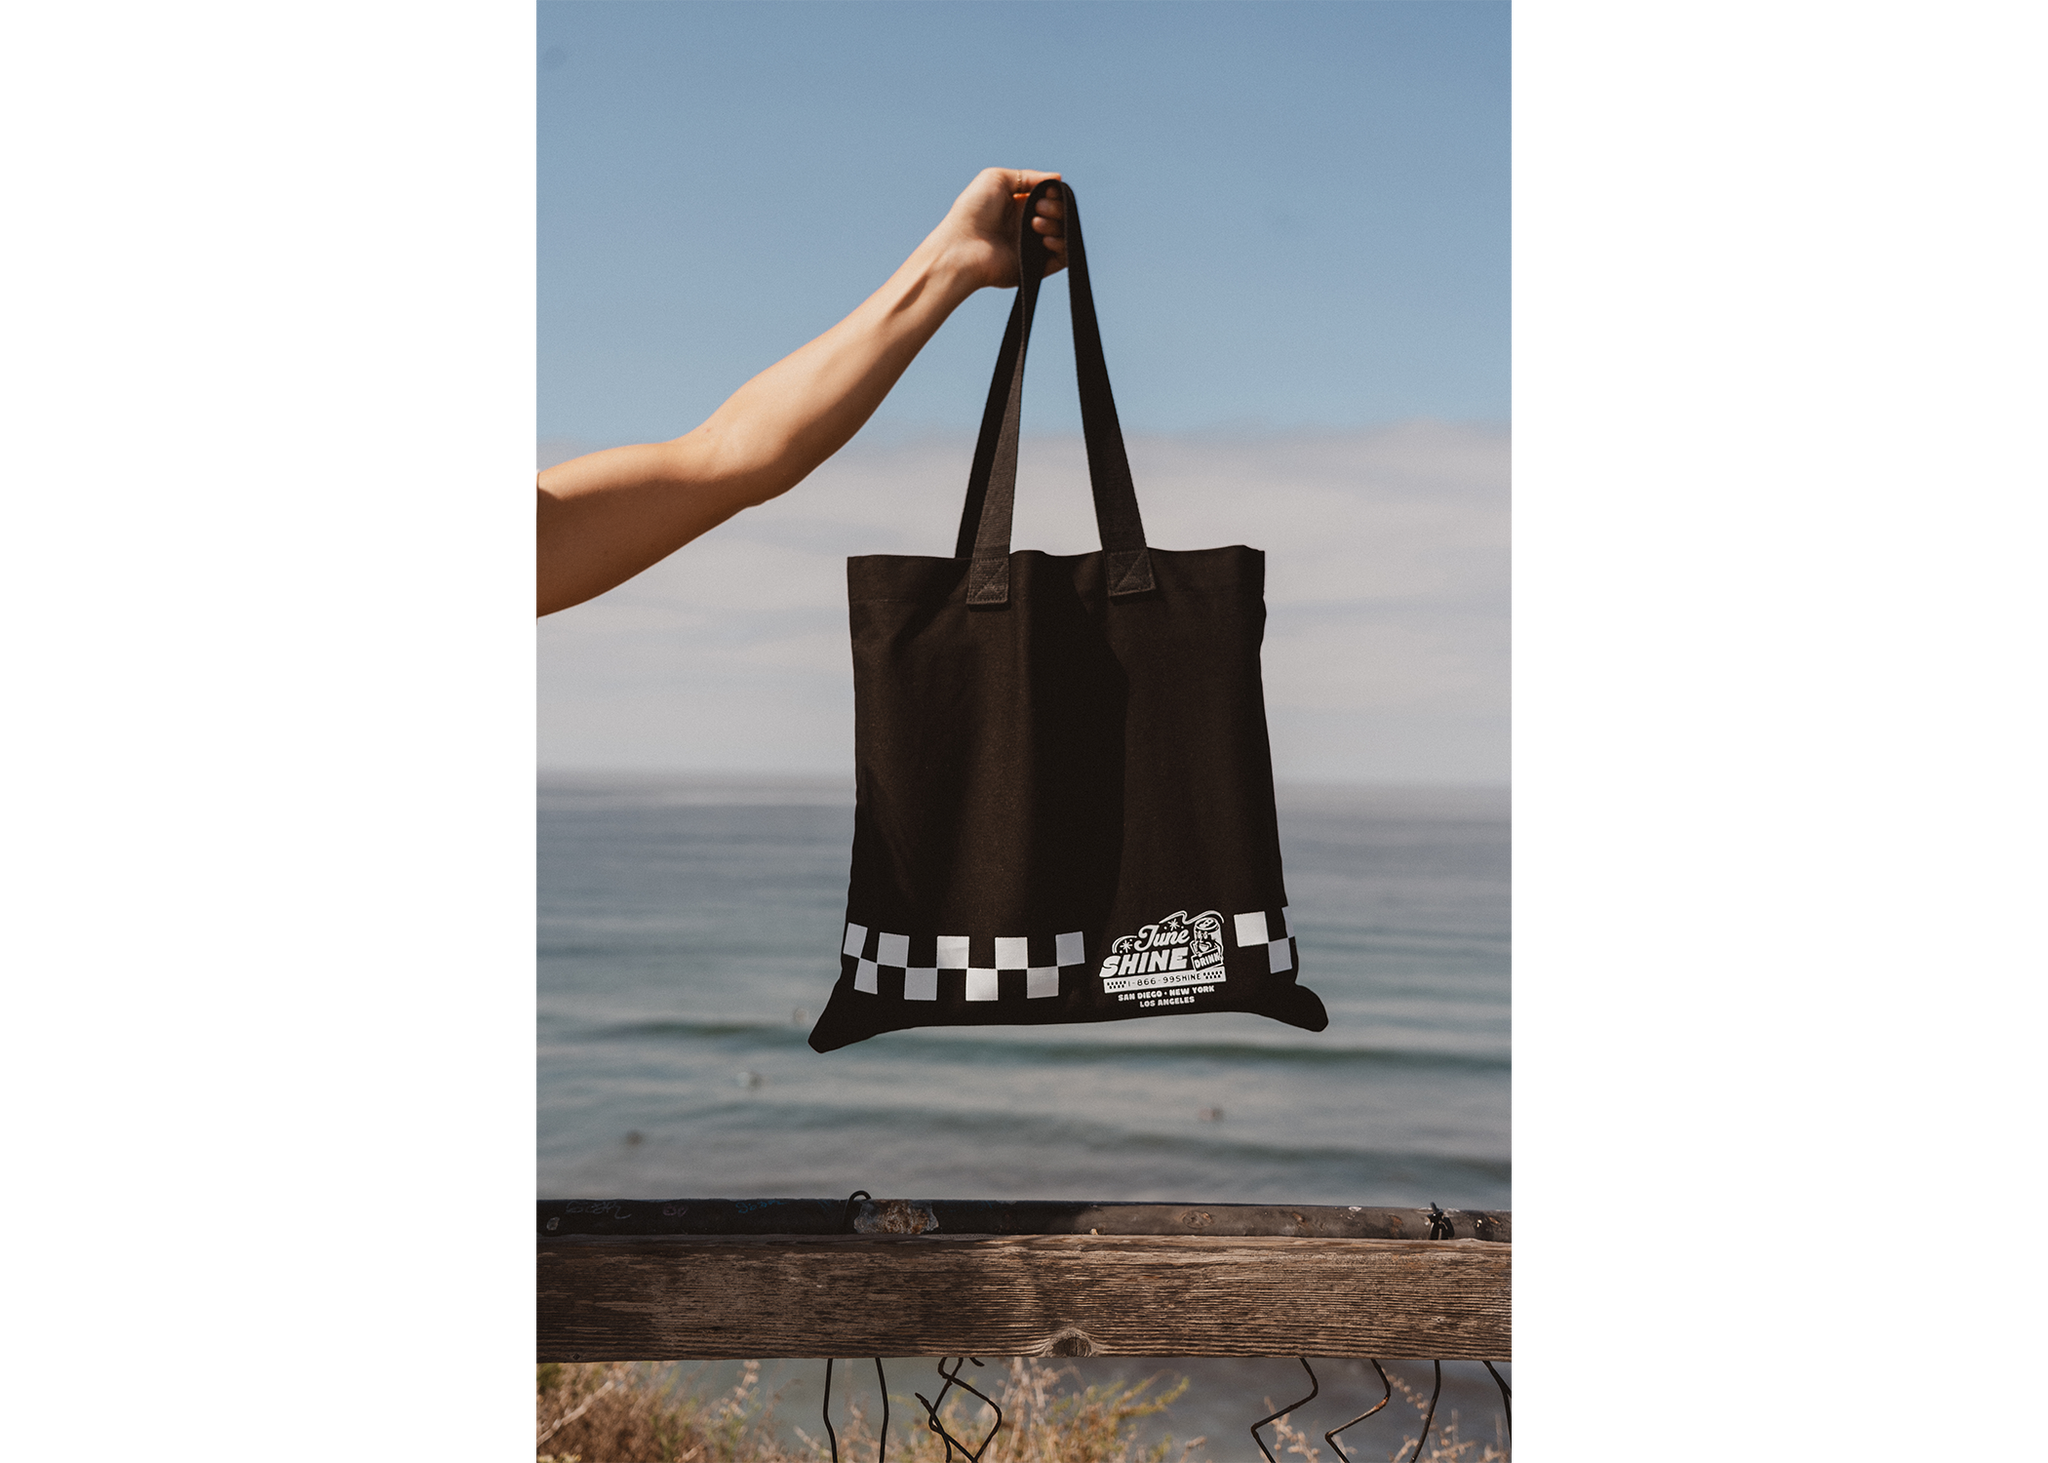 Arm holding Black canvas tote bag with white checkerboard print and text that reads JuneShine, 1-866-99SHINE San Diego New York Los Angeles against an ocean background